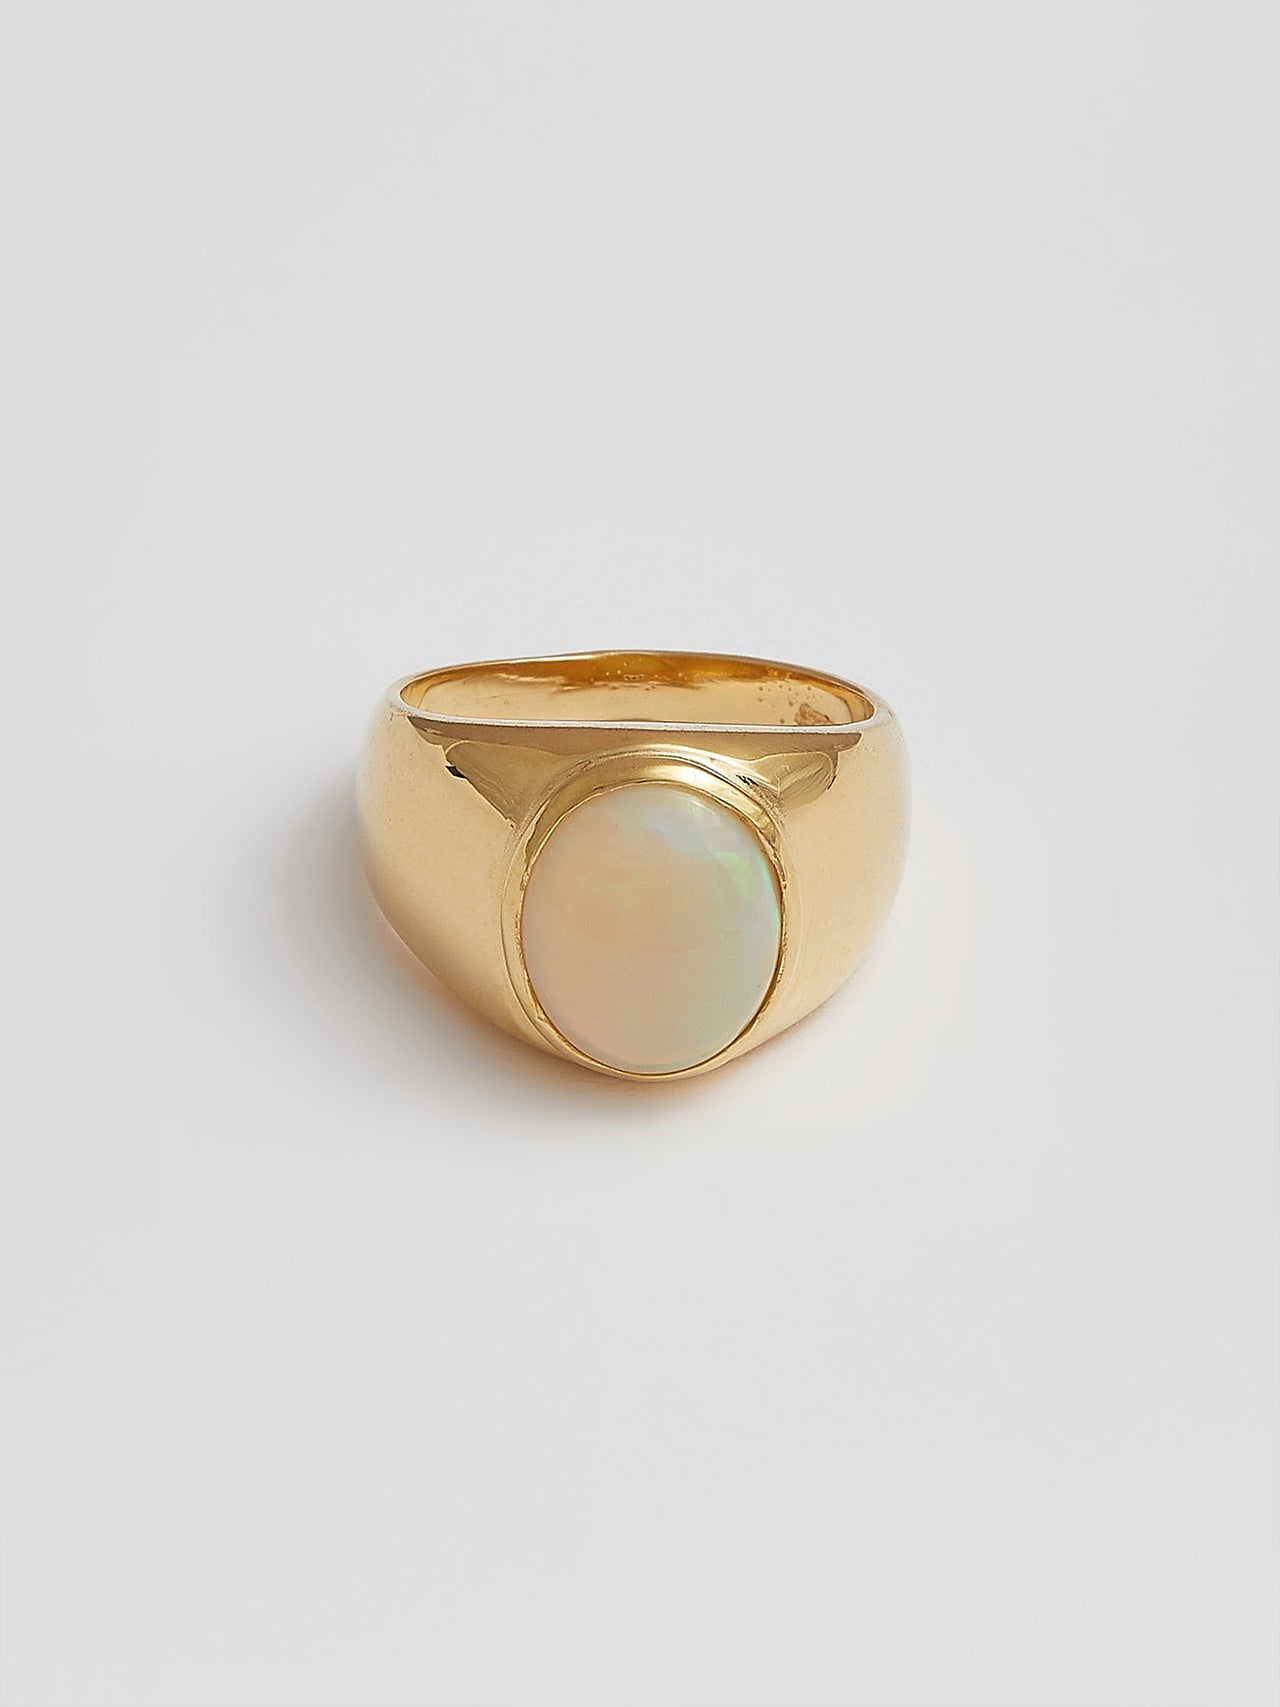 Product shot of the Classico Opal Signet (Vermeil Opal Signet Ring Face: 12.9mm×2.8mm 8x11mm Cabochon Opal, Approx 2.5ct) Background: Grey backdrop